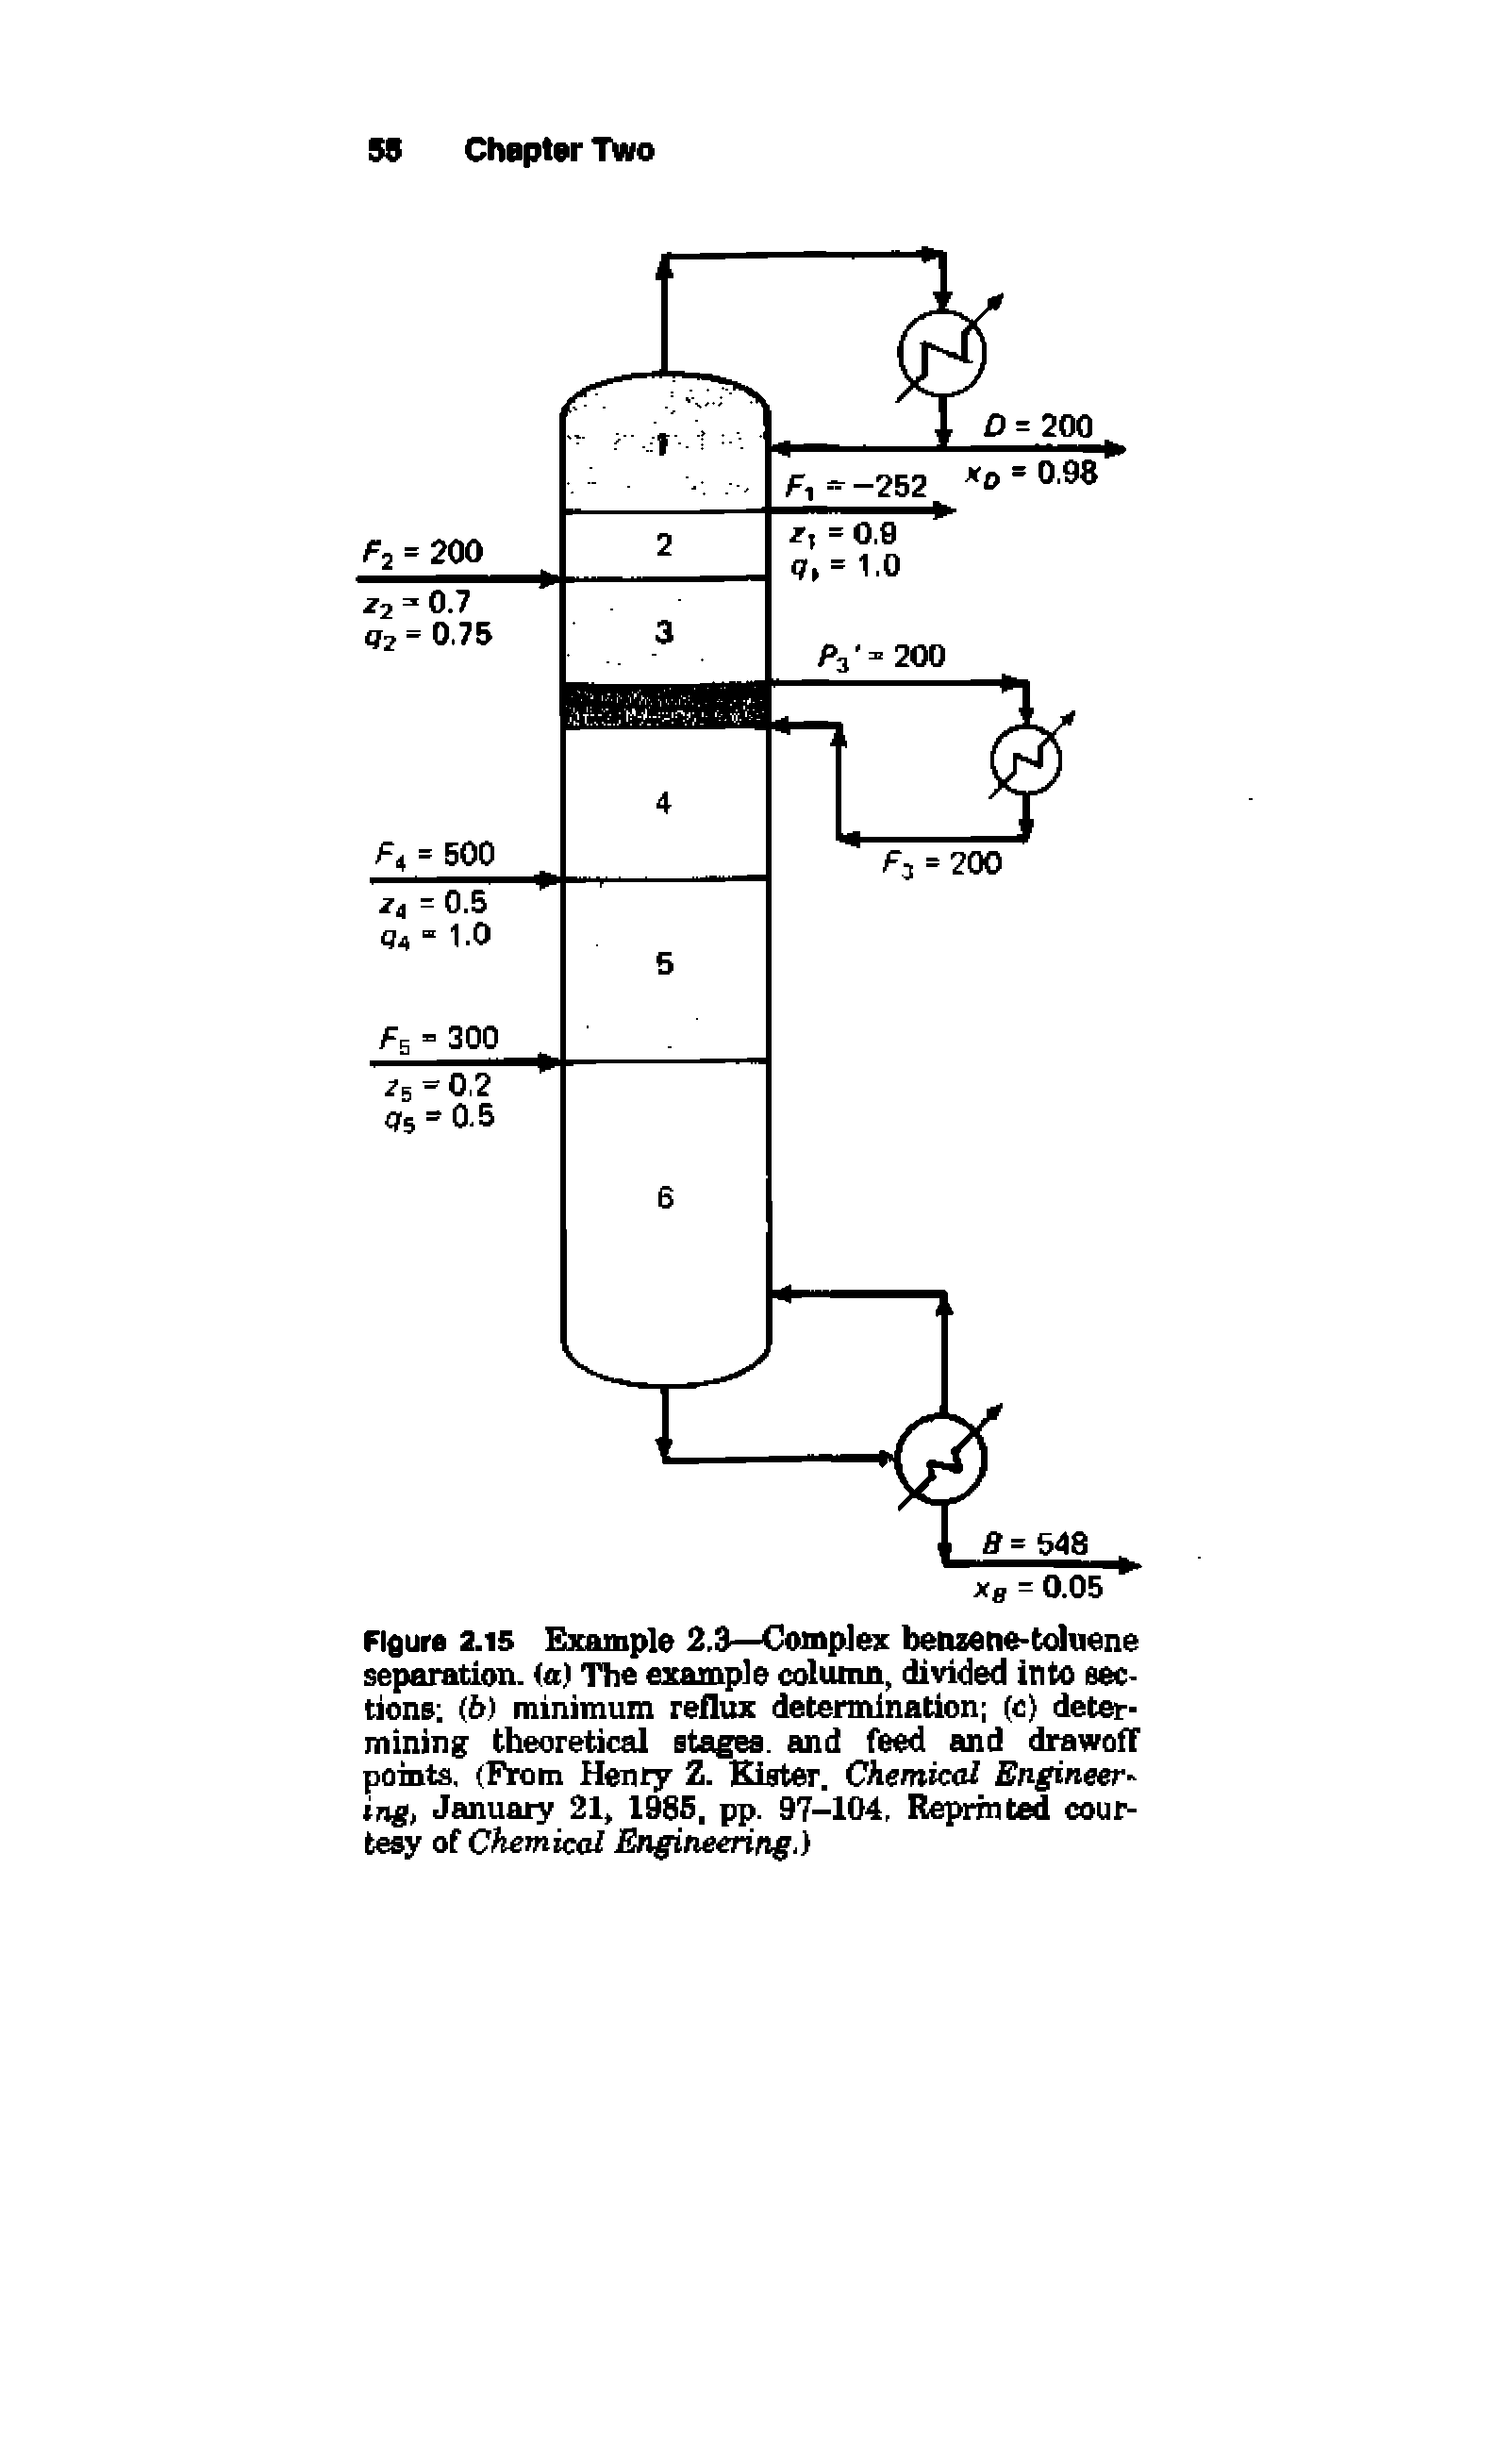 Figure 2.15 Example 2.3—Complex benzene-toluene separation, (a) The example column, divided into sections (6) minimum reflux determination (c) determining theoretical stages, and feed and drawoff points. (From Henry Z. Kister. Chemical Engineering, January 21, 1985, pip. 97-104, Reprinted courtesy of Chemical Engineering.)...